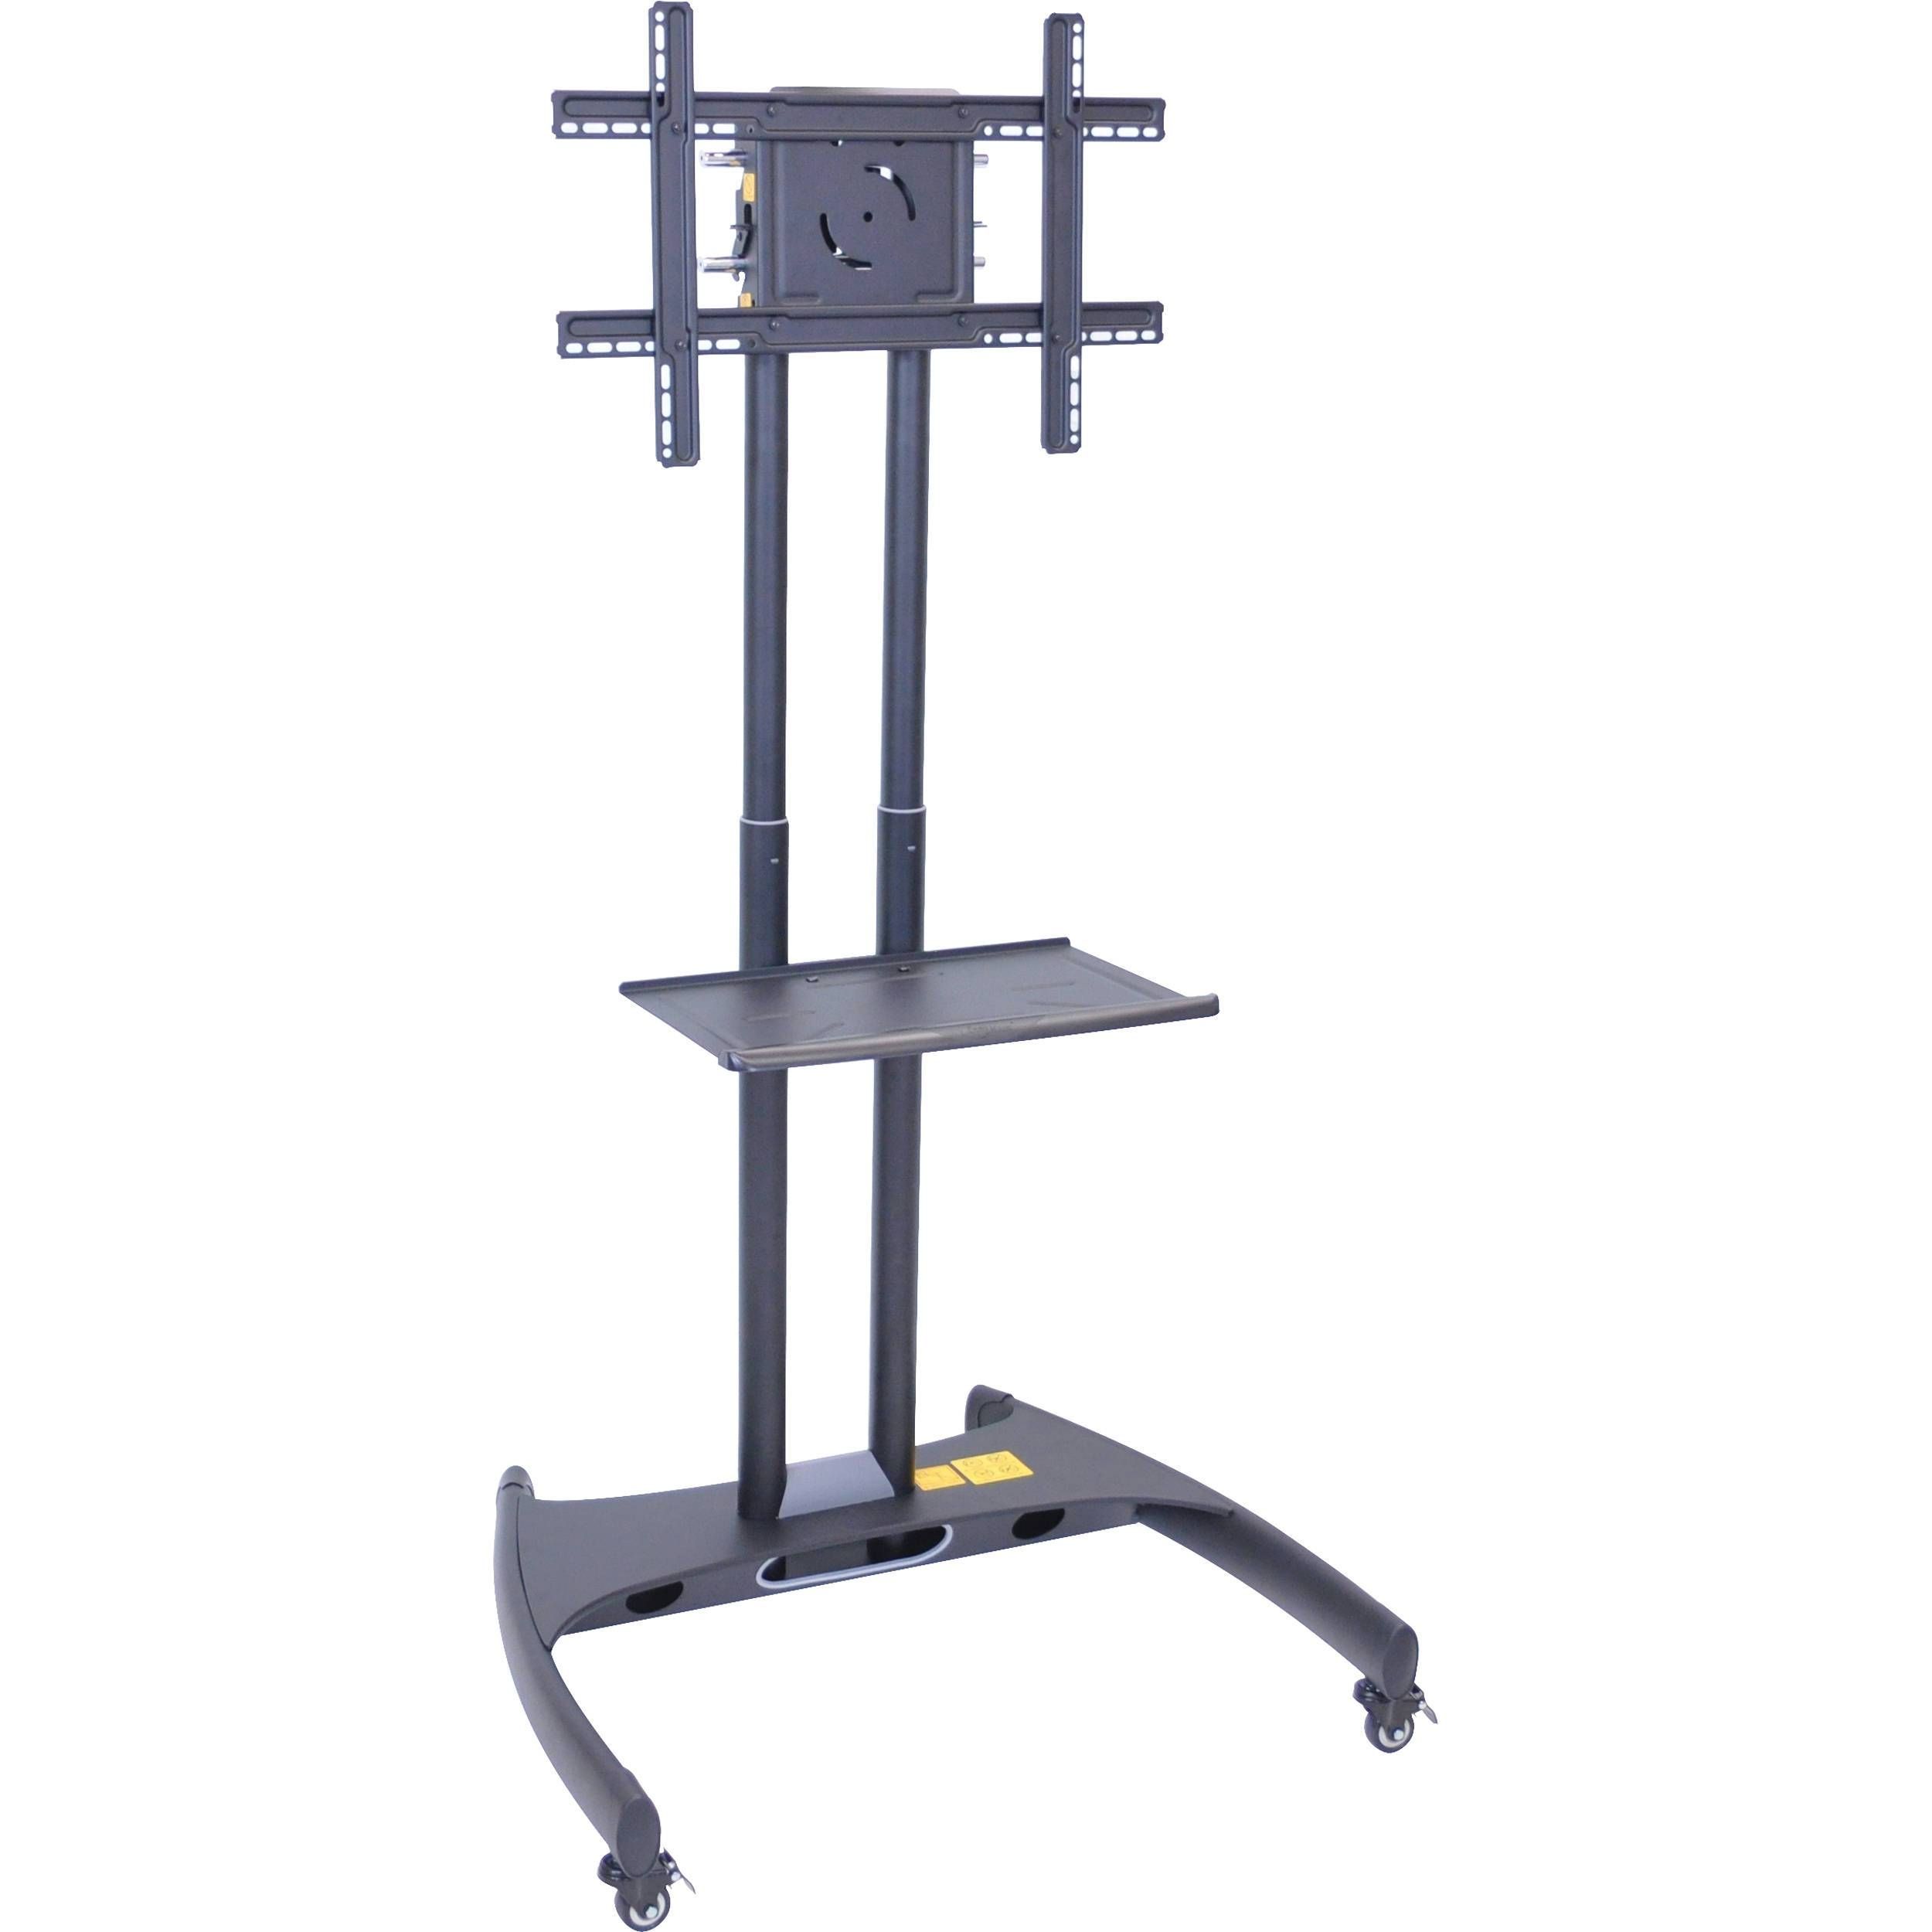 Luxor Fp2500 Adjustable Height Lcd Tv Stand Fp2500 B&h Photo For Tv Stand With Mount (View 7 of 15)